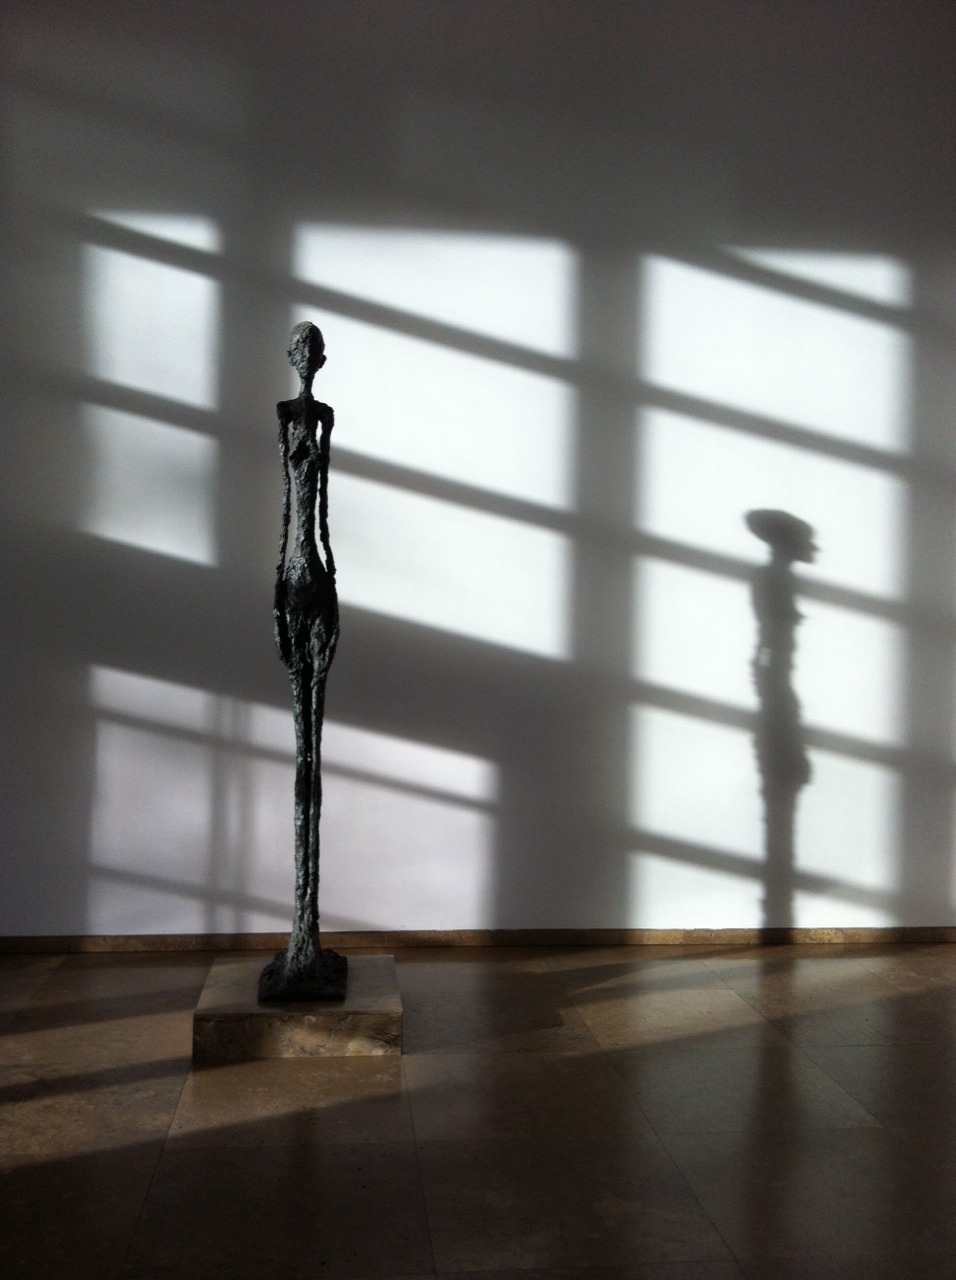 wtfarthistory:
“Giacometti at the Getty: Morning Light, Frontal Profile
”